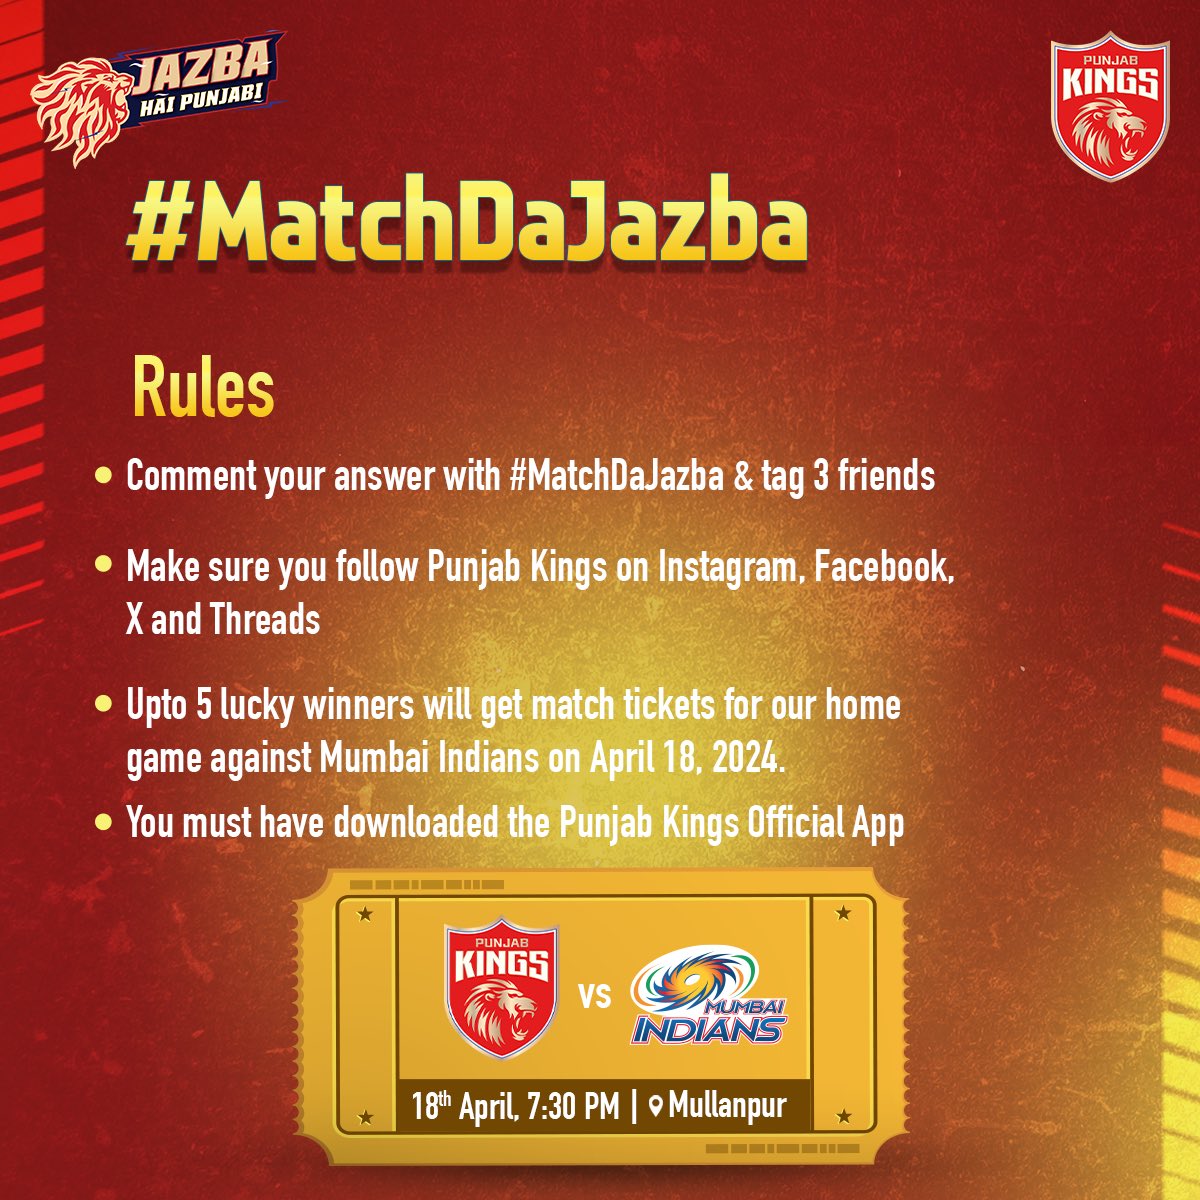 #SherSquad, here is your chance to witness the action against Mumbai Indians live from Sadda Akhada 2.0! 🏟🤩 Guess the correct answer and follow the rules of the #MatchDaJazba contest to win match 🎟s. Swipe to know them and hurry up! ⬅🥳 #SaddaPunjab #PunjabKings